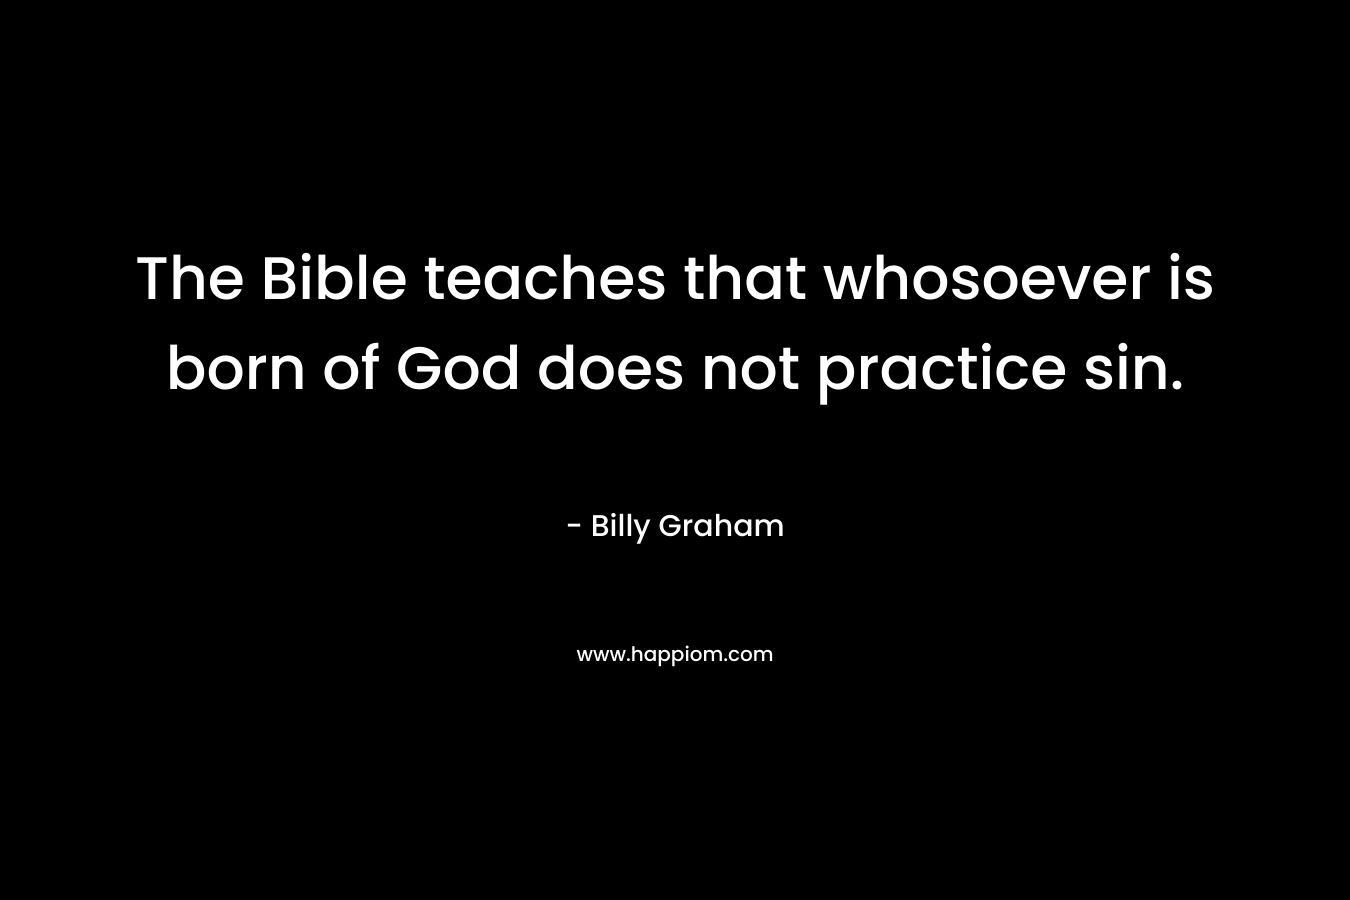 The Bible teaches that whosoever is born of God does not practice sin.